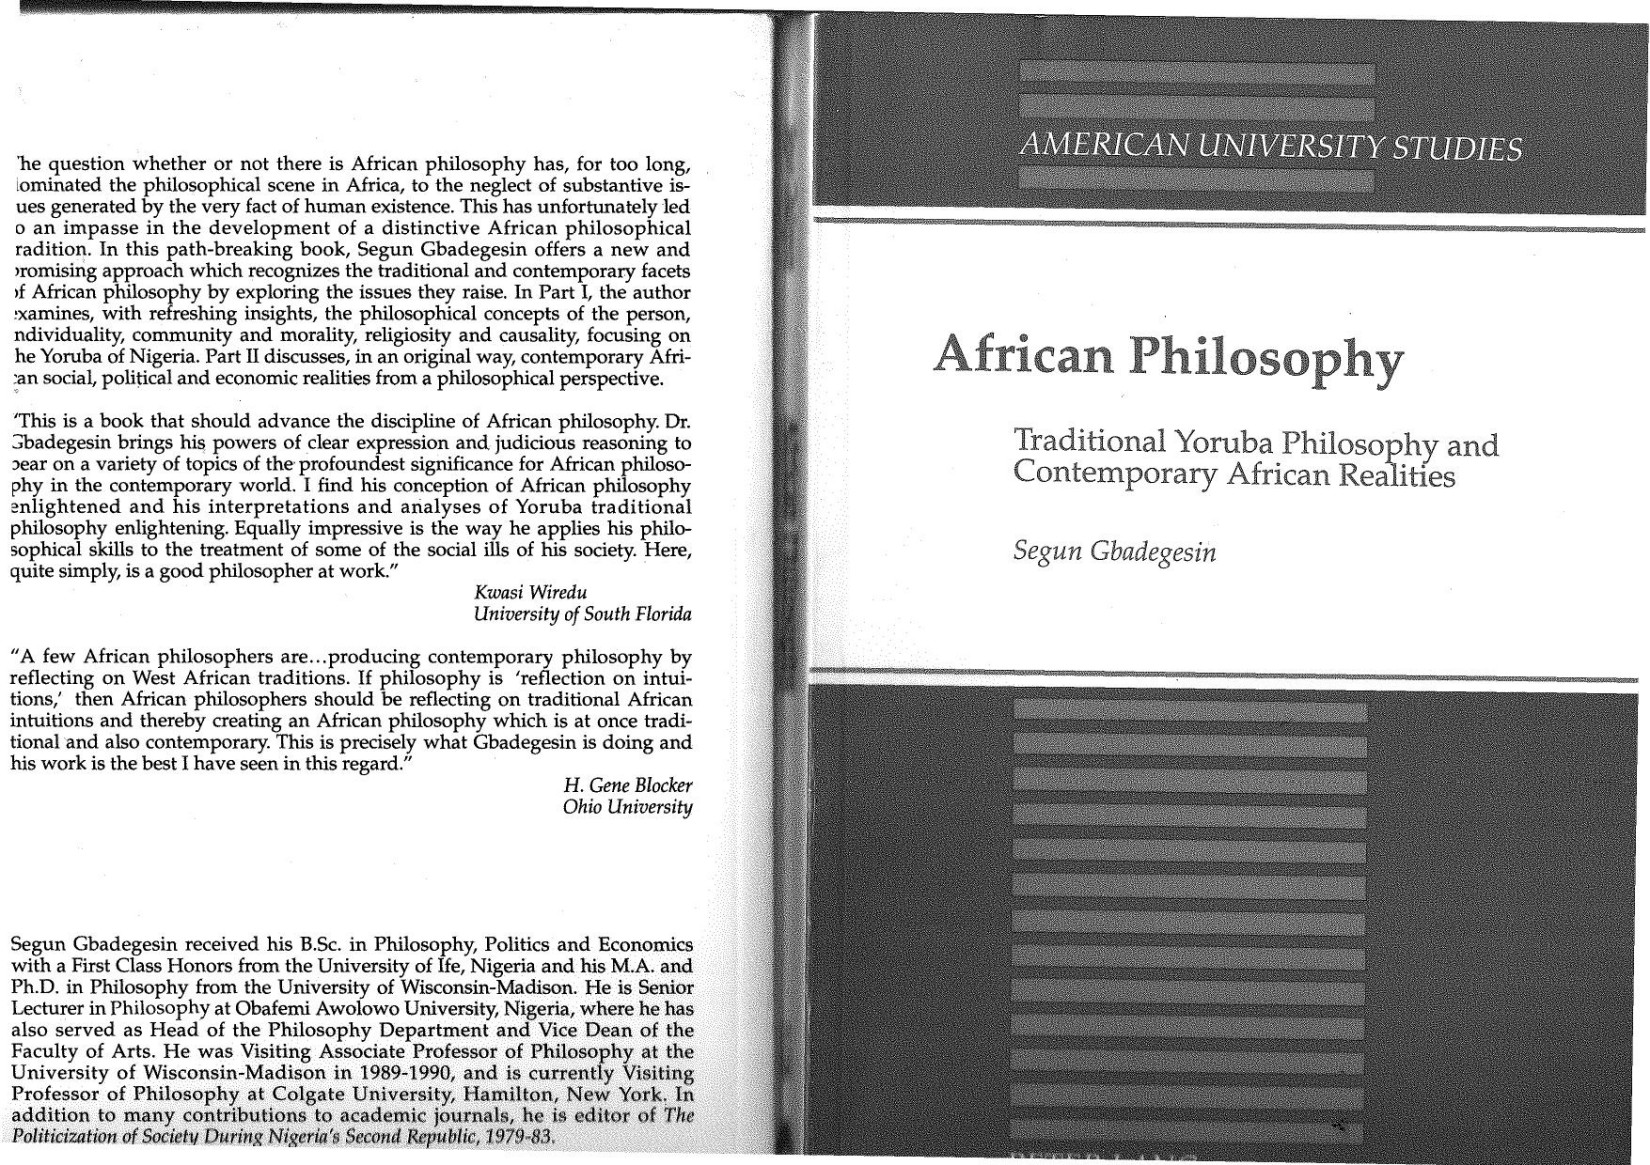 African Philosophy. Traditional Yoruba Philosophy and Contemporary African Realities 1991